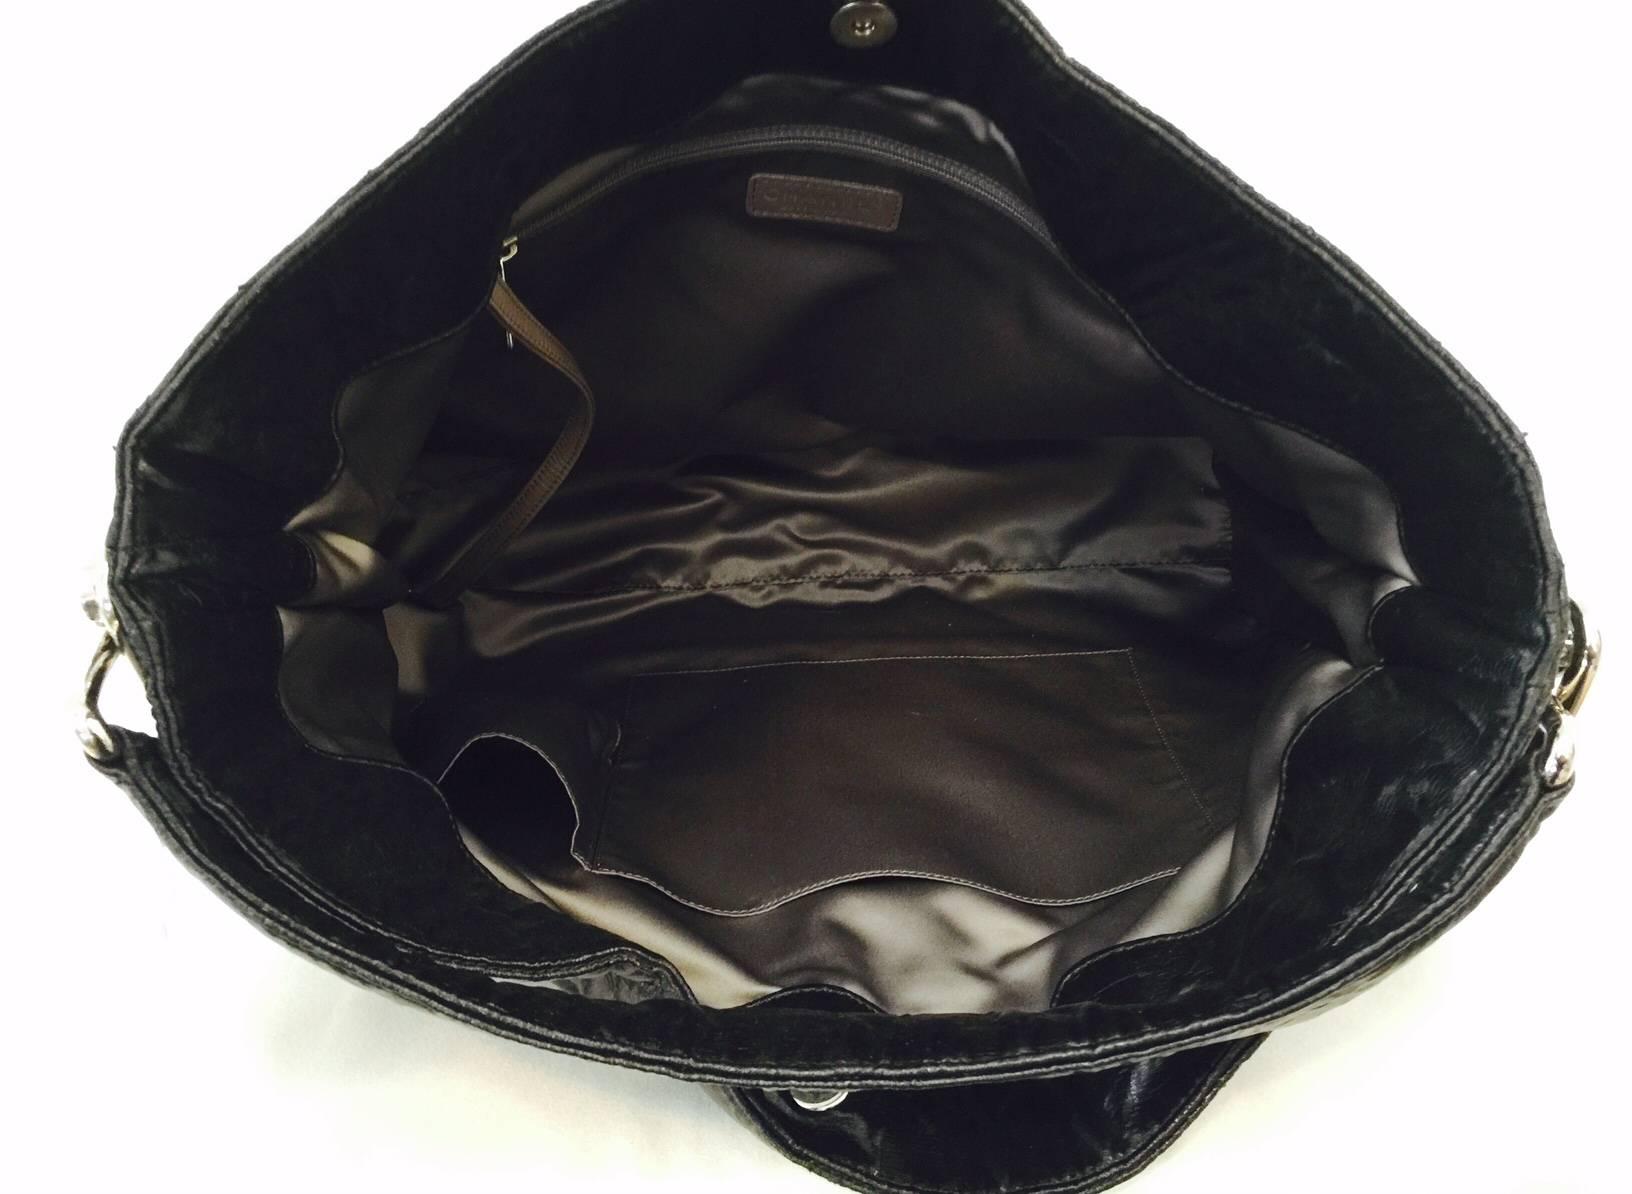  Chanel Black Quilted Coated Canvas Le Marais Large Hobo Bag Serial No.12339279 1